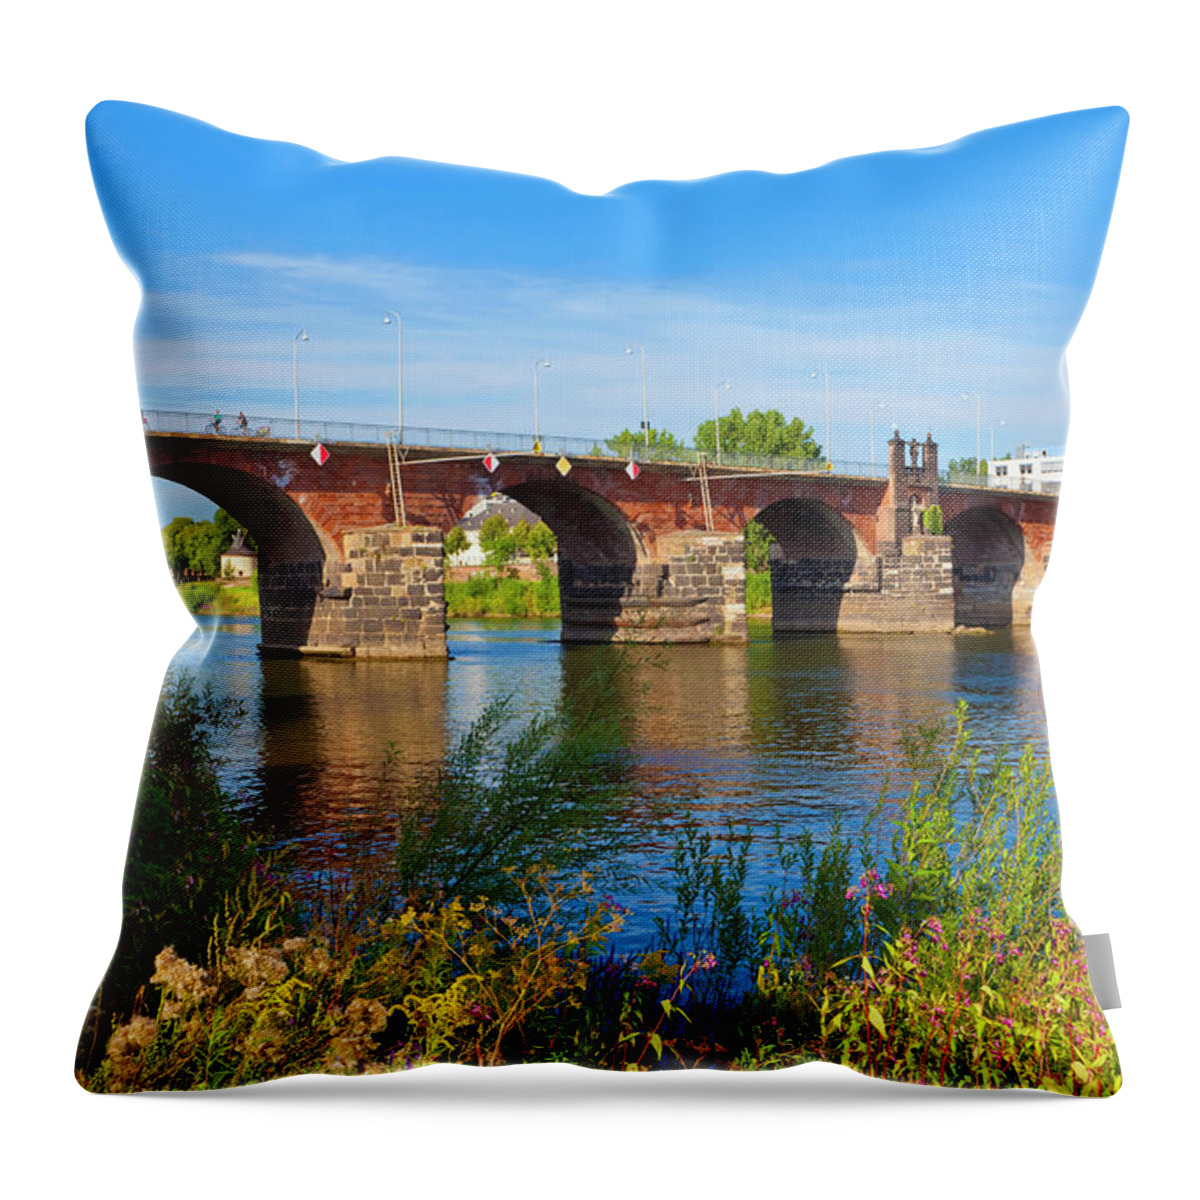 Roman Throw Pillow featuring the photograph The Roman Bridge Over Mosel River In by Werner Dieterich